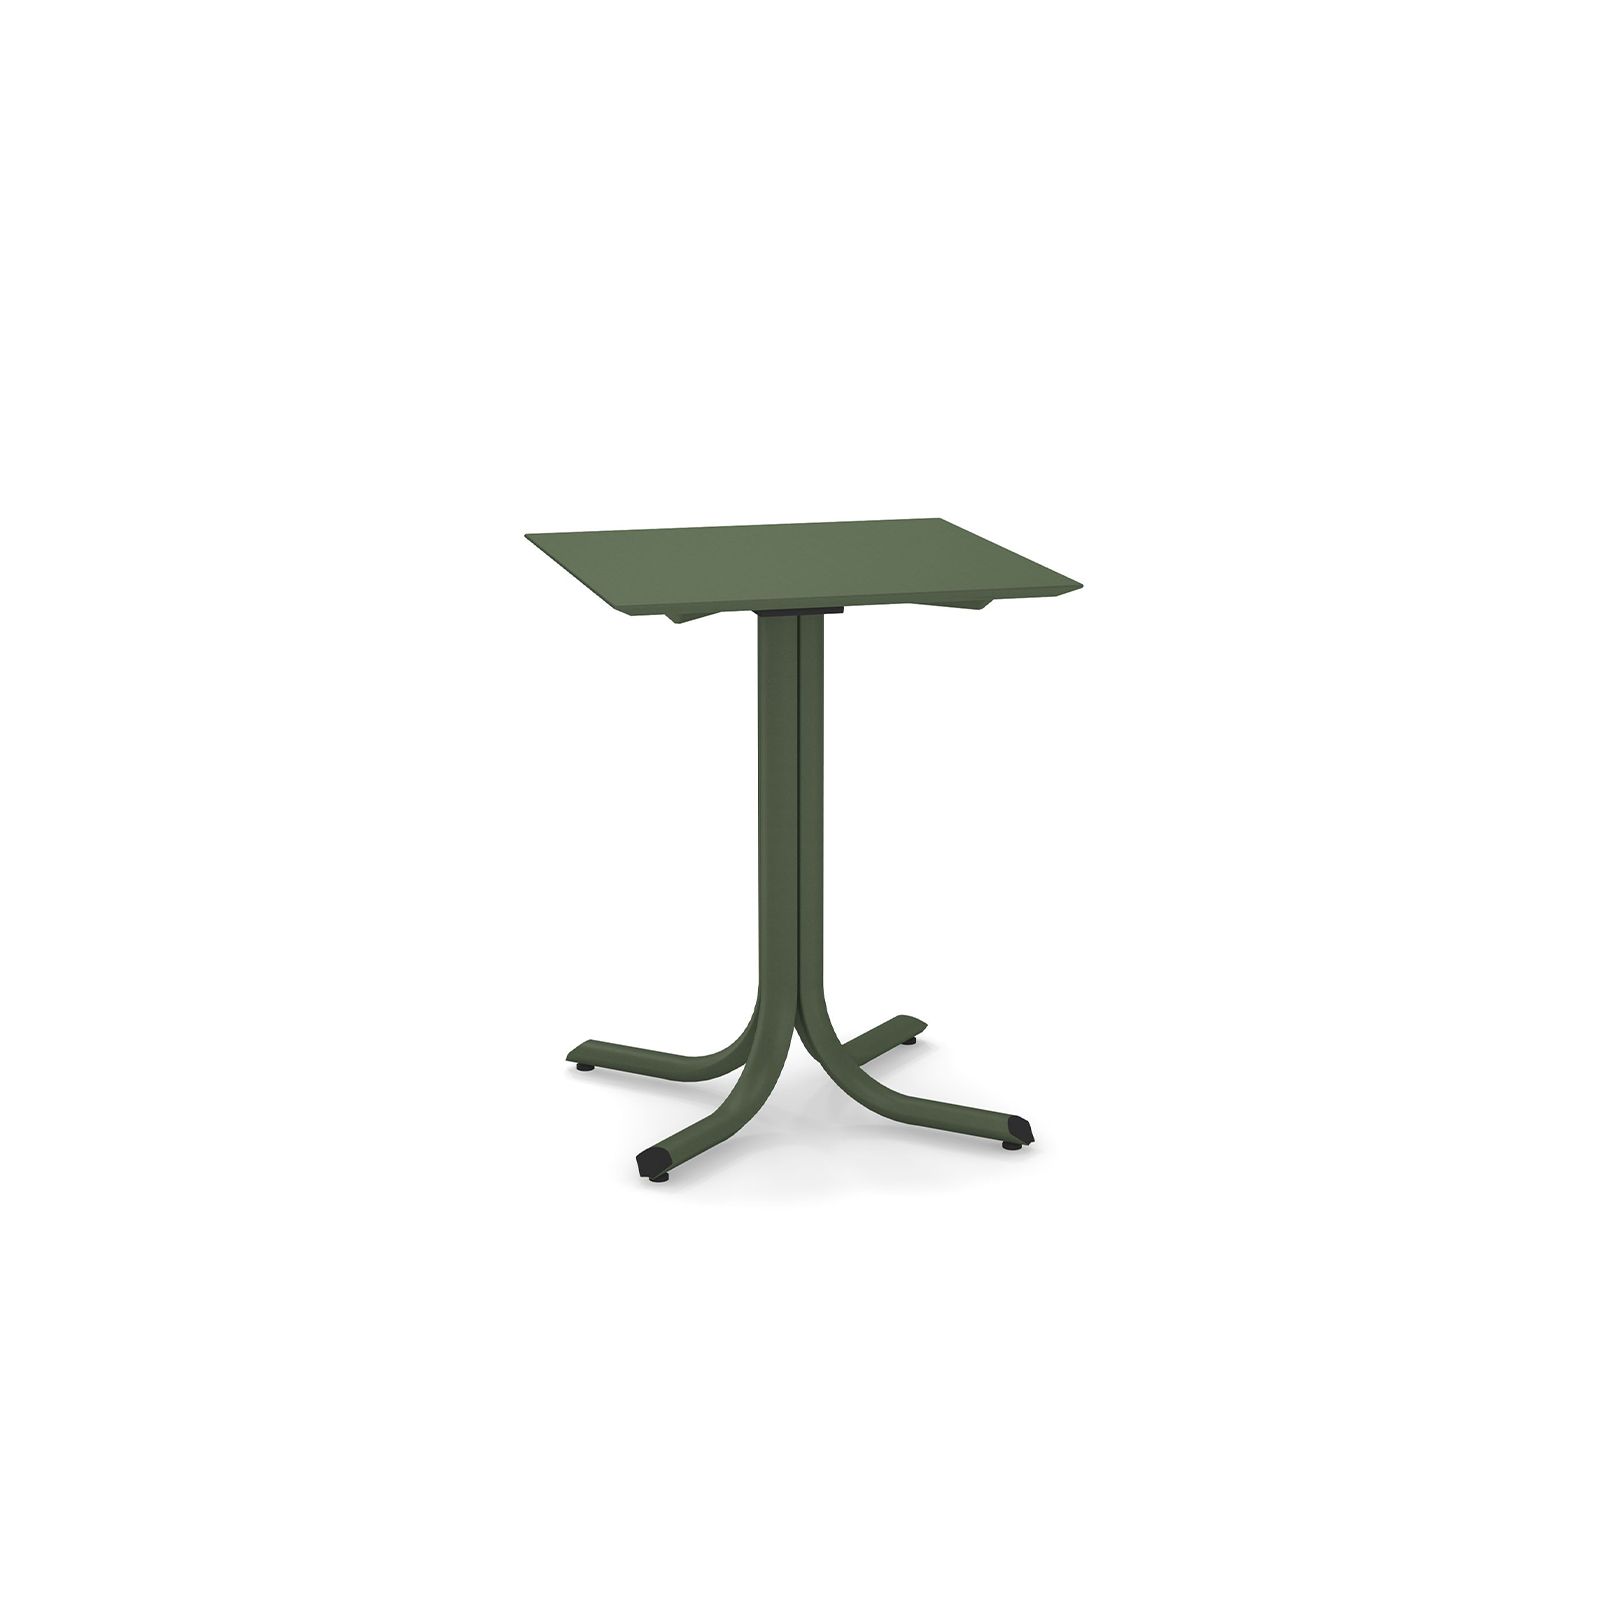 TABLE SYSTEM DINING TABLE